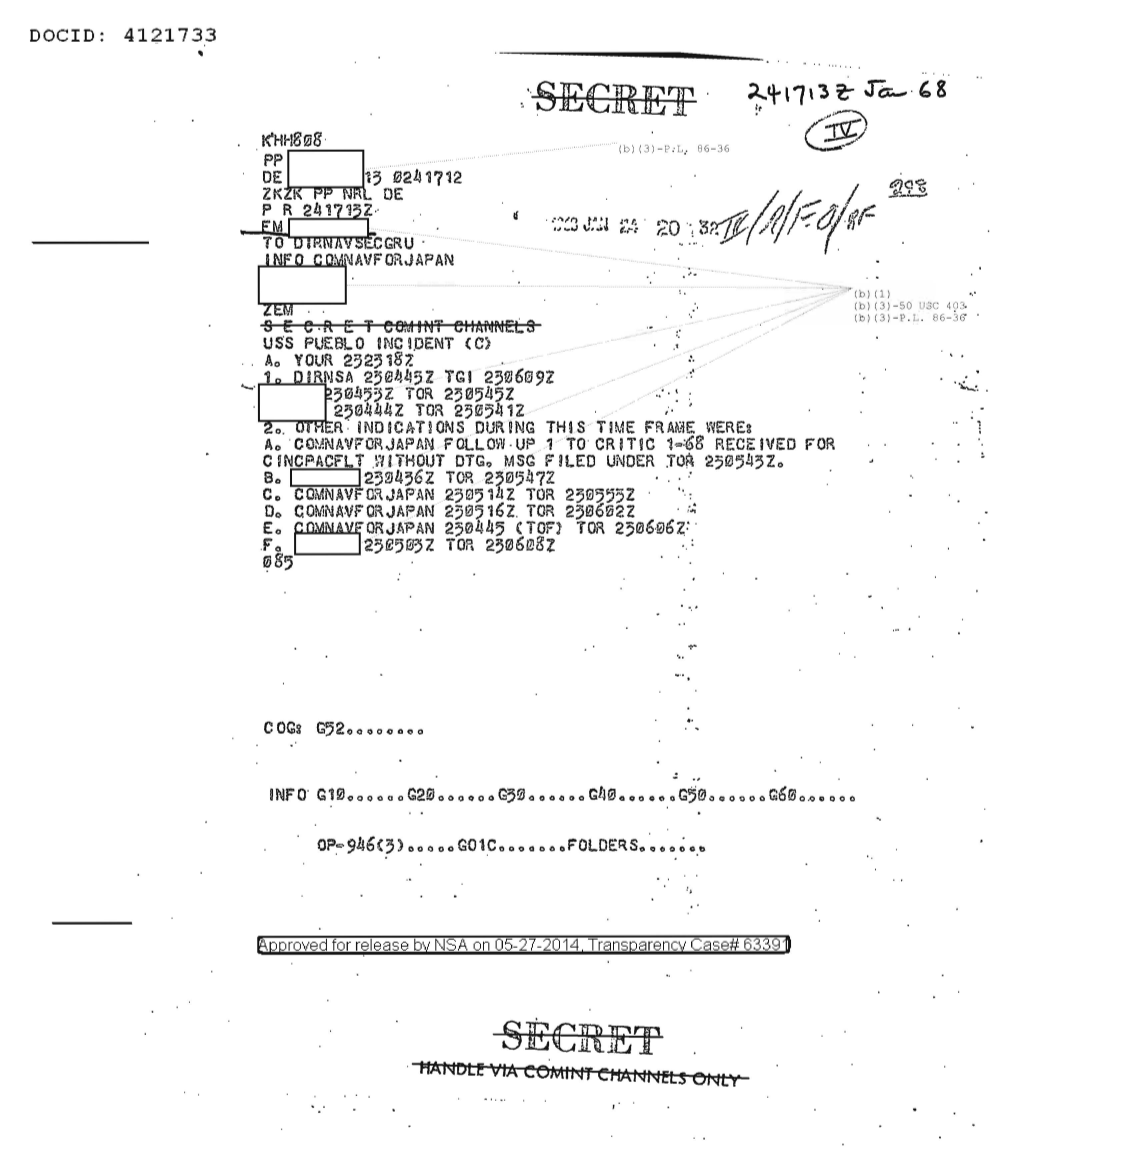  PUEBLO INCIDENT OTHER INDICATIONS OF TROUBLE (DOC ID 4121733).PDF